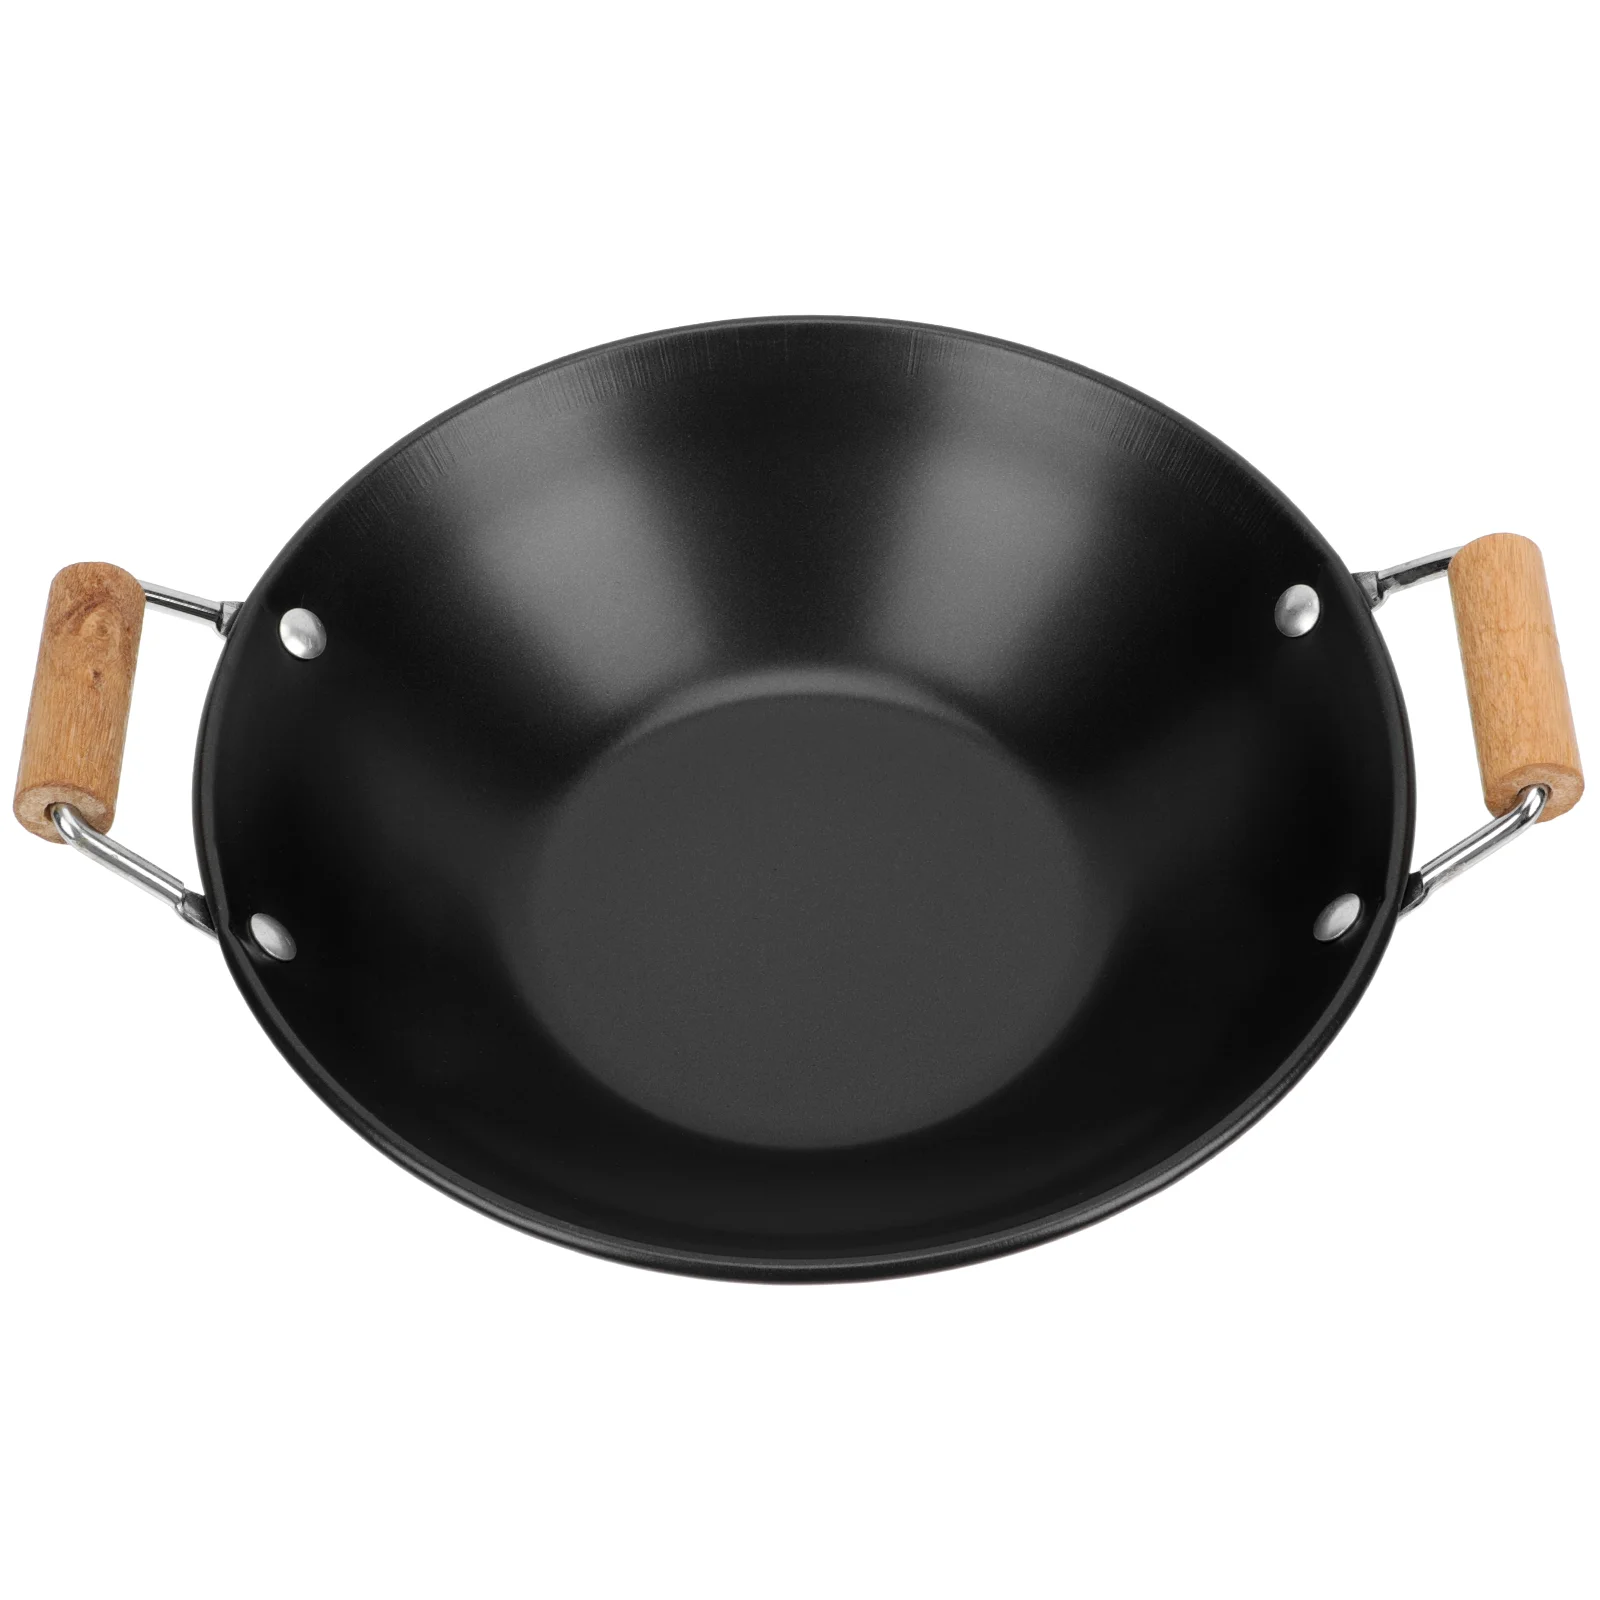 

Pan Pot Wok Steel Cooking Carbon Stainless Kitchen Handle Cookware Hot Stir Fry Pans Non Stick Nonstick Stove Bottom Frying